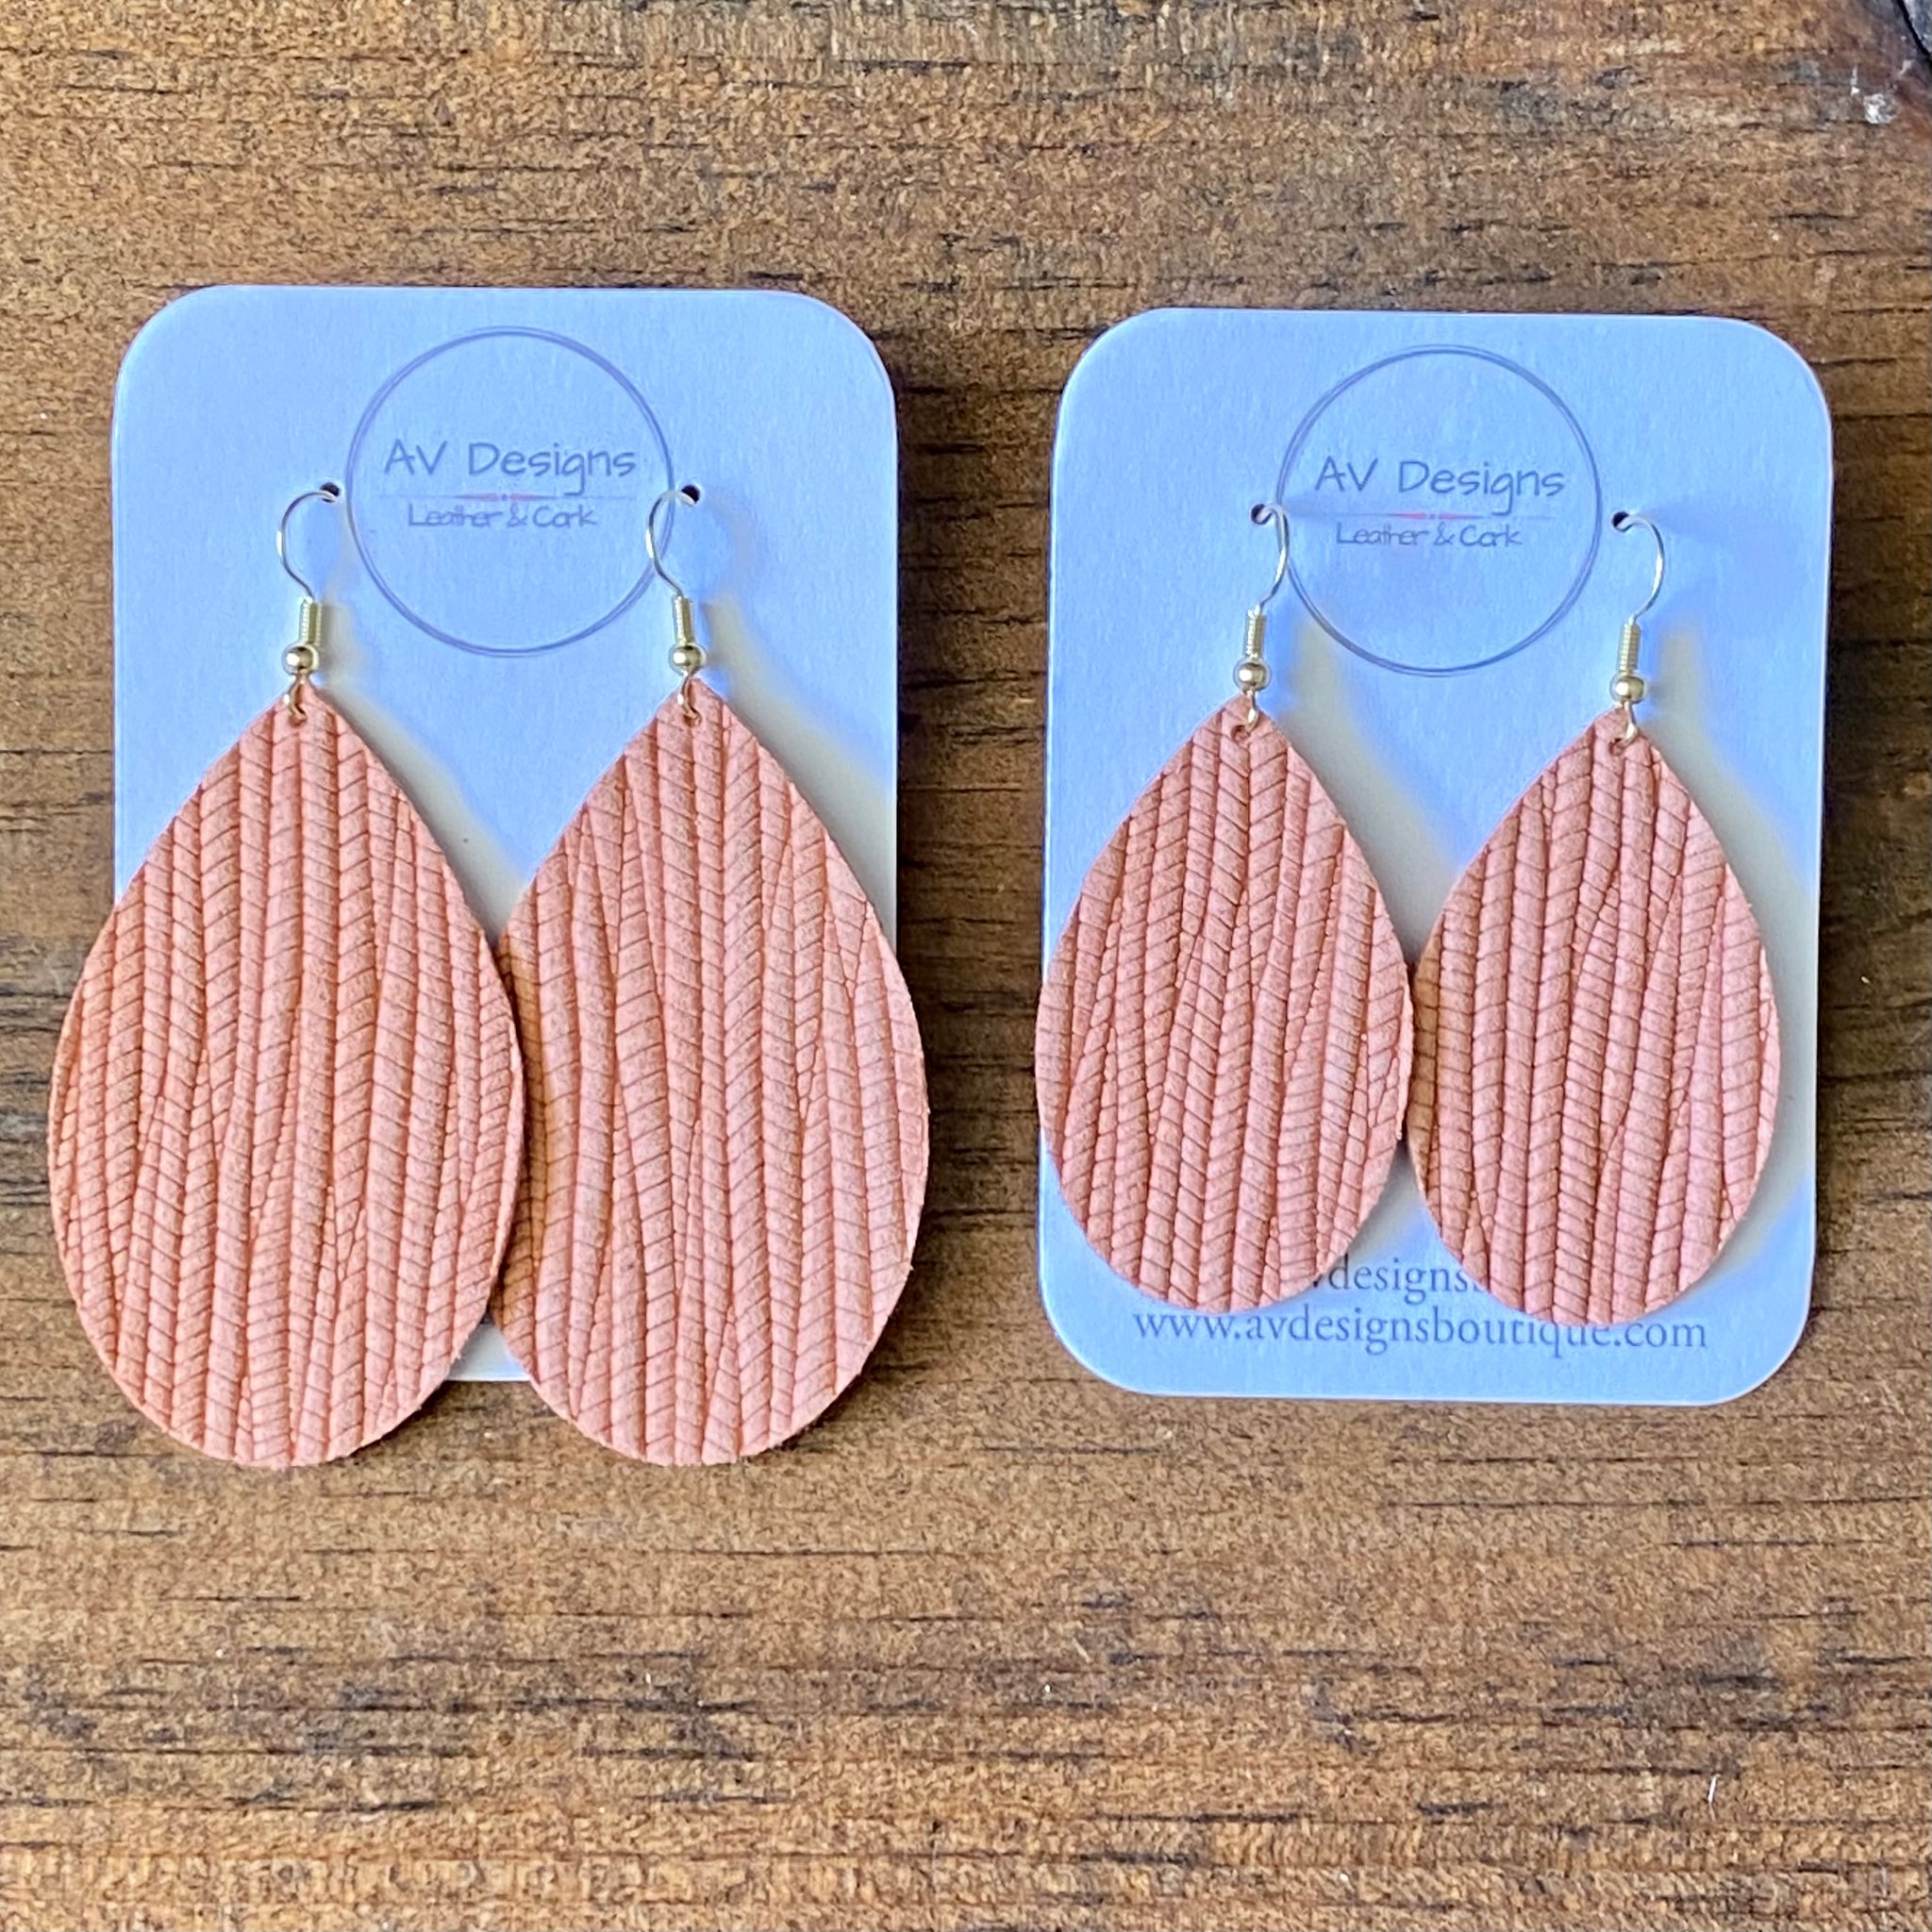 Peach Palm Leather Earrings additional styles available  AV Designs  Boutique